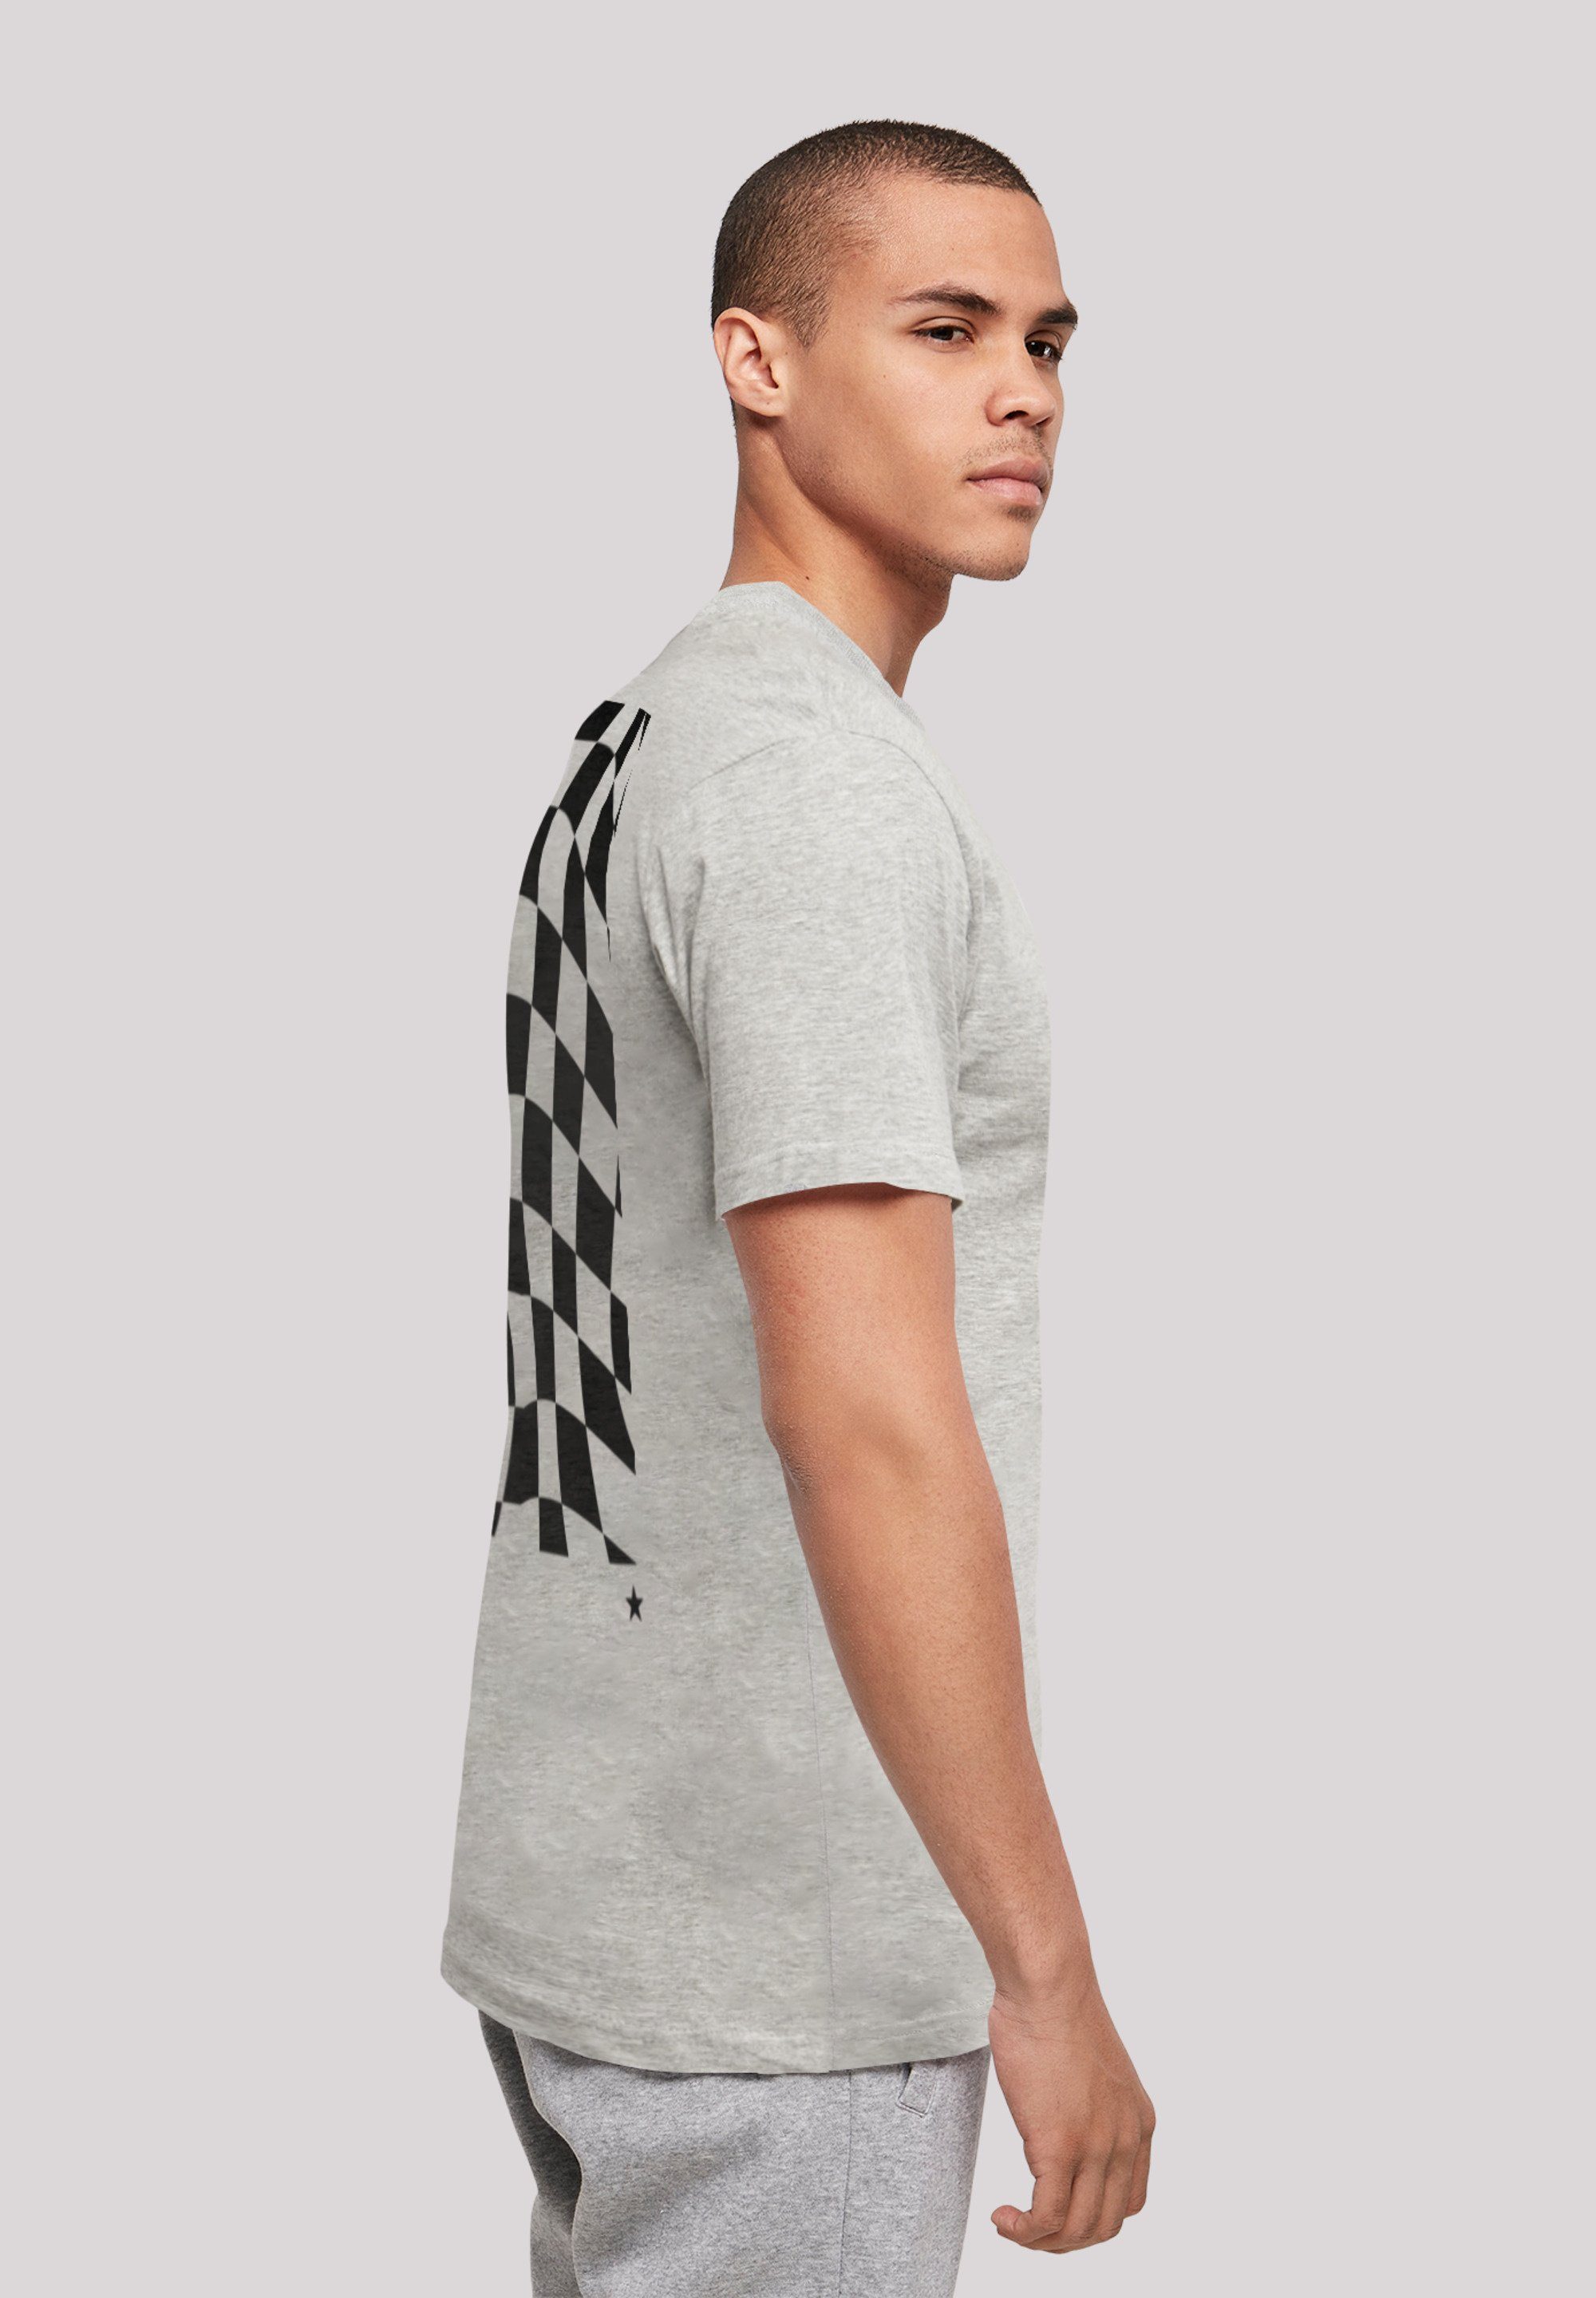 F4NT4STIC T-Shirt Wavy Schach Muster grey Print heather